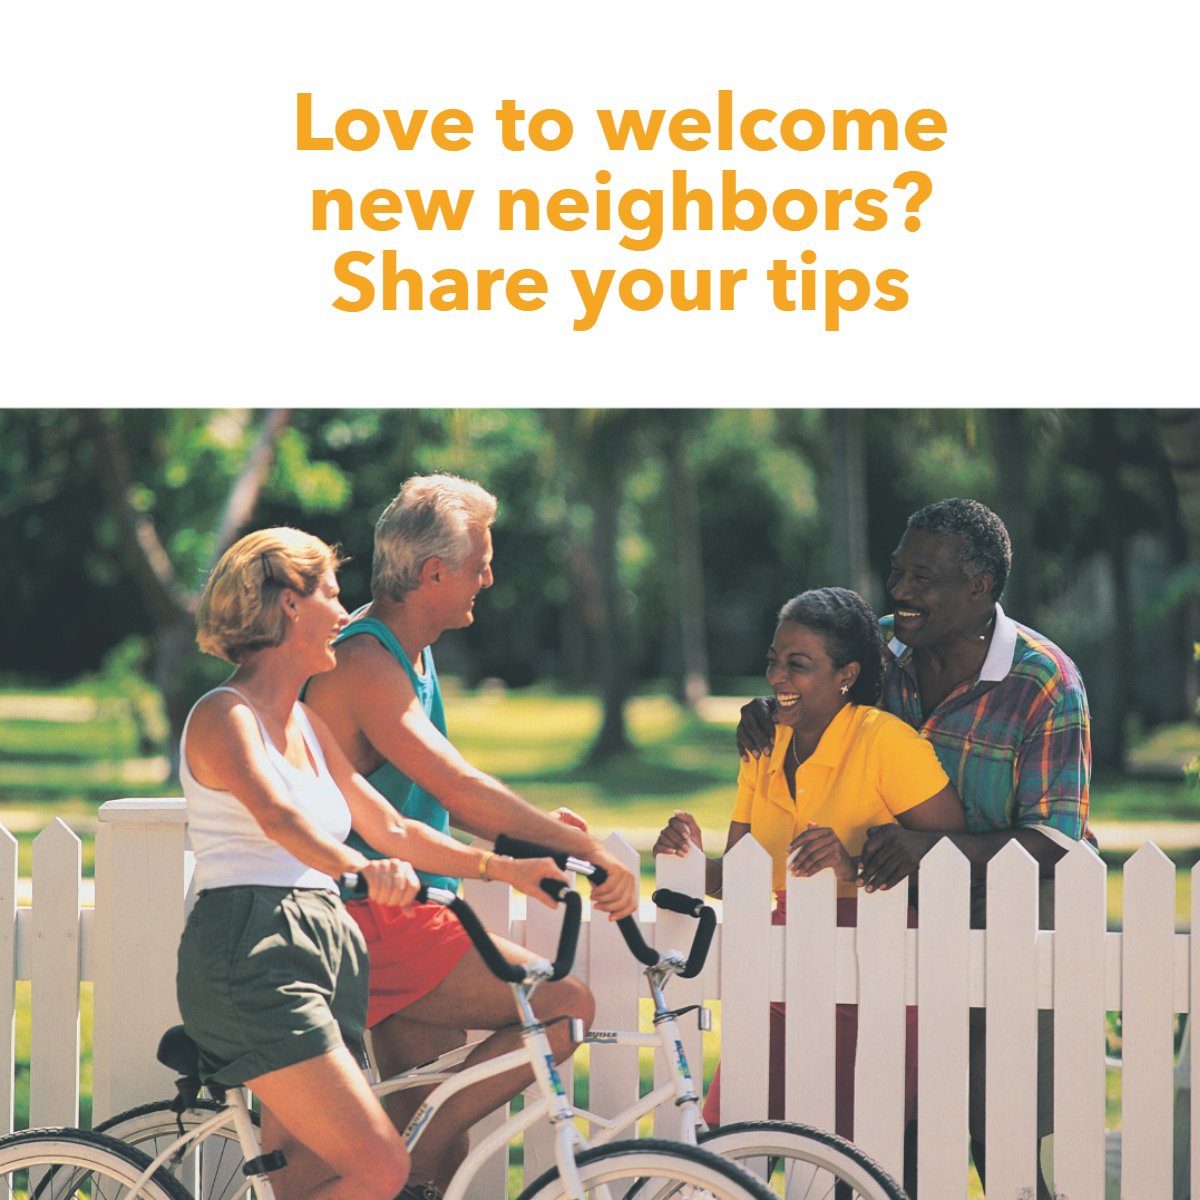 How would you like to welcome new neighbors? 🤔

Share your favorite tips below, or tell us about a time you felt welcomed into your new neighborhood. 🏘

#engagement #question #newneighbors #neigbor #homeowner #homeowners
 #lakeworth #boyntonbeach #delraybeach